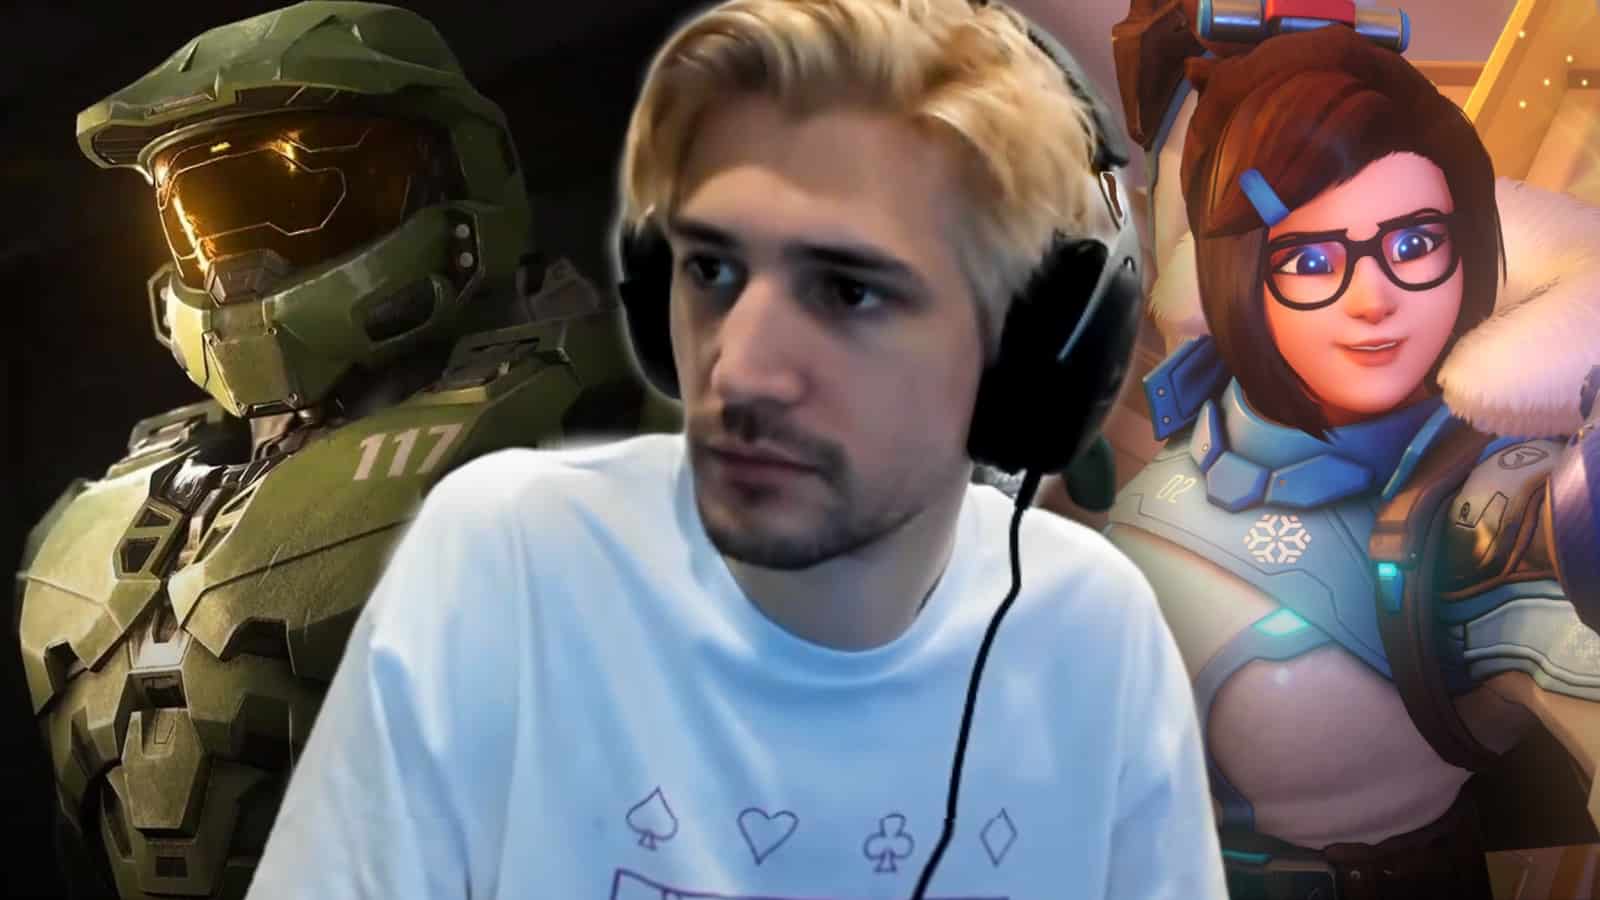 xQc next to Master Chief from Halo and Overwatch's Mei.